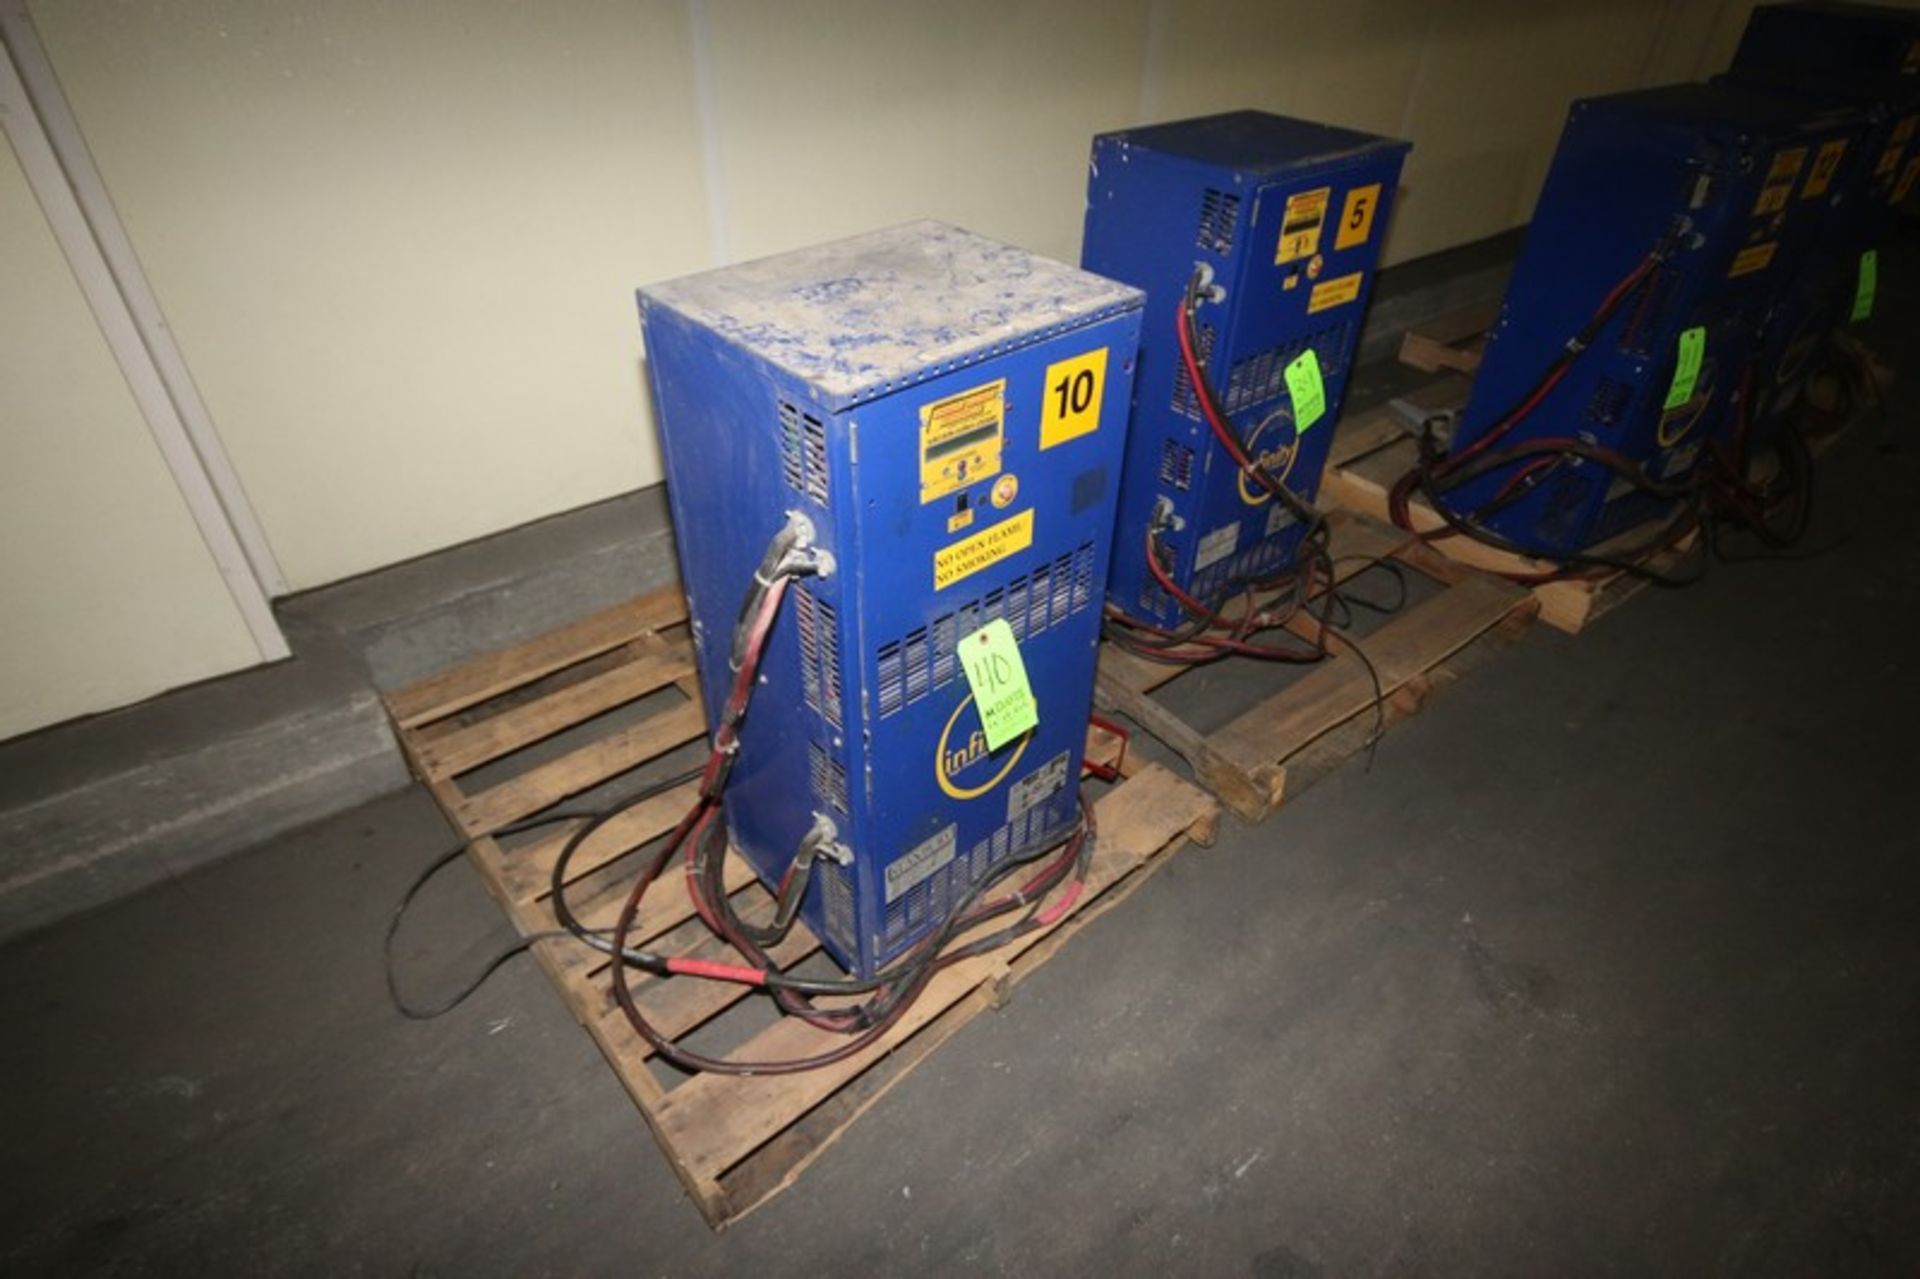 Infinity High Frequency Forklift Battery Charger, M/N FC18/13, S/N 2013010706, 480 Volts, 3 Phase, - Image 3 of 6